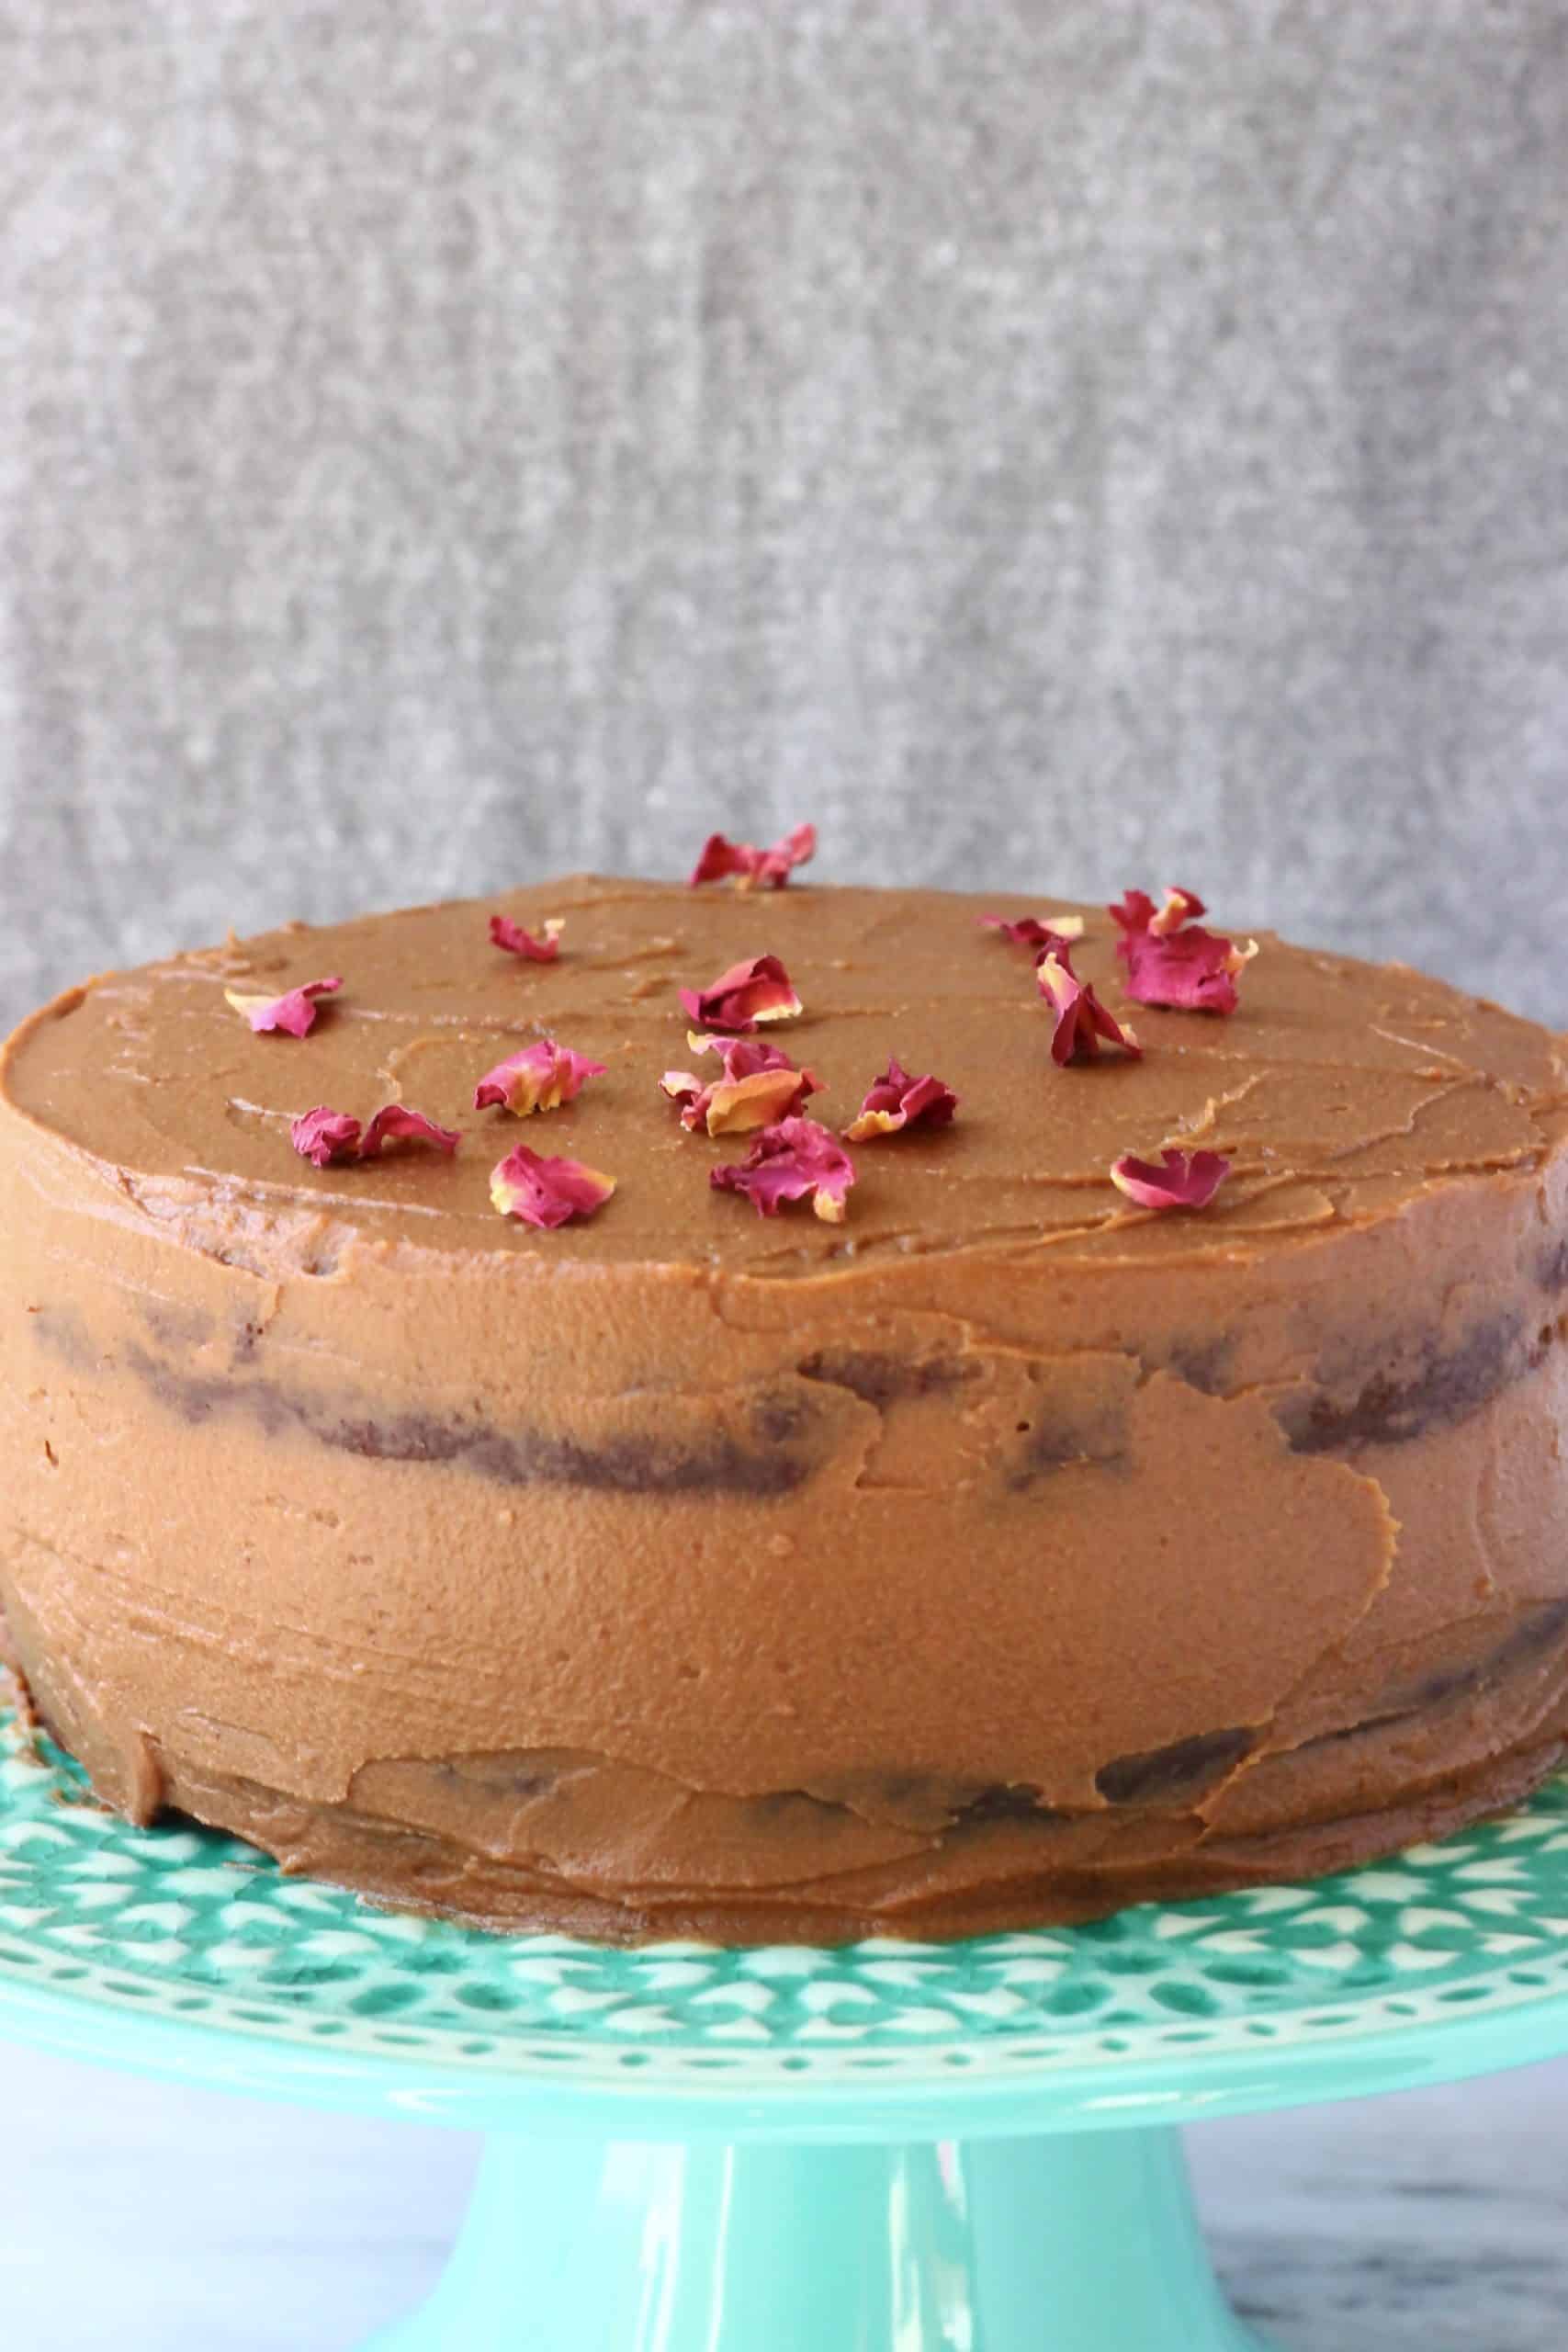 Gluten-free vegan chocolate cake with chocolate frosting sprinkled with rose petals on a cake stand